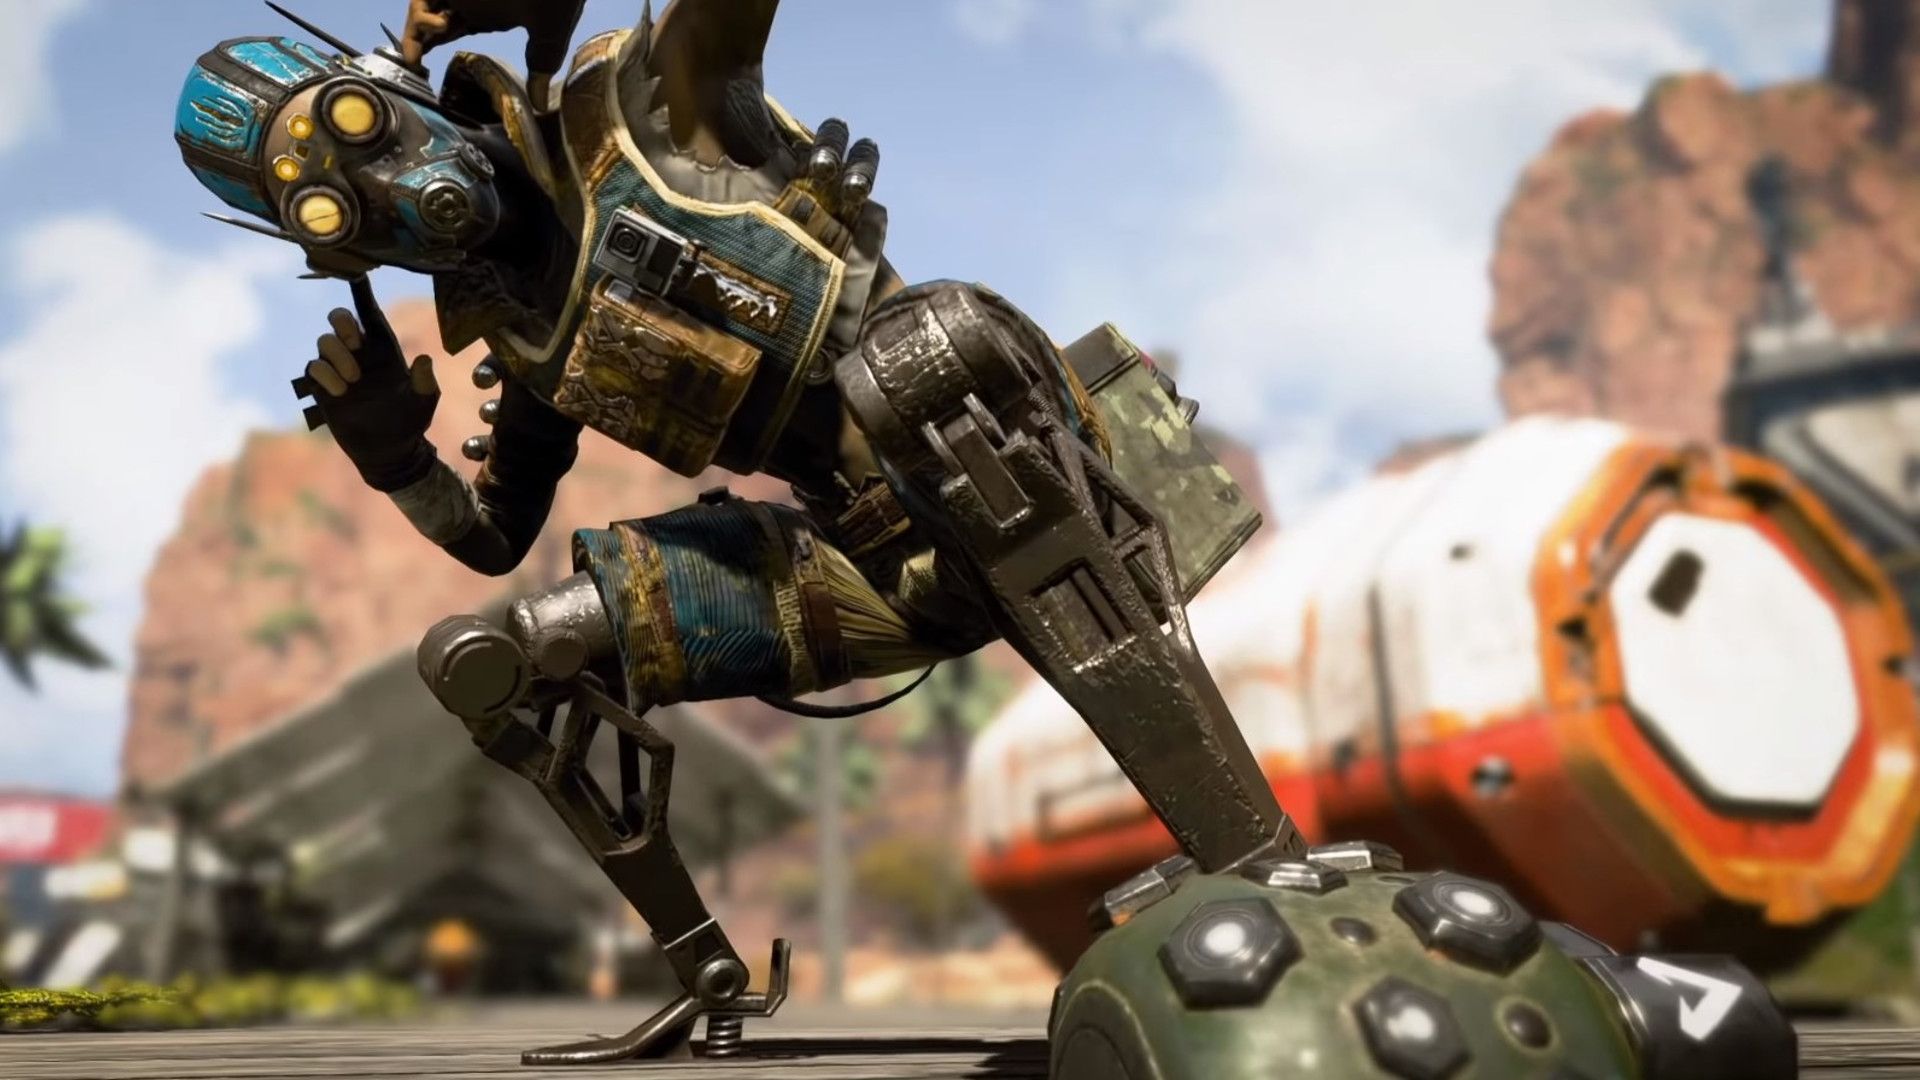 Octane is getting buffed in Apex Legends Lost Treasures event